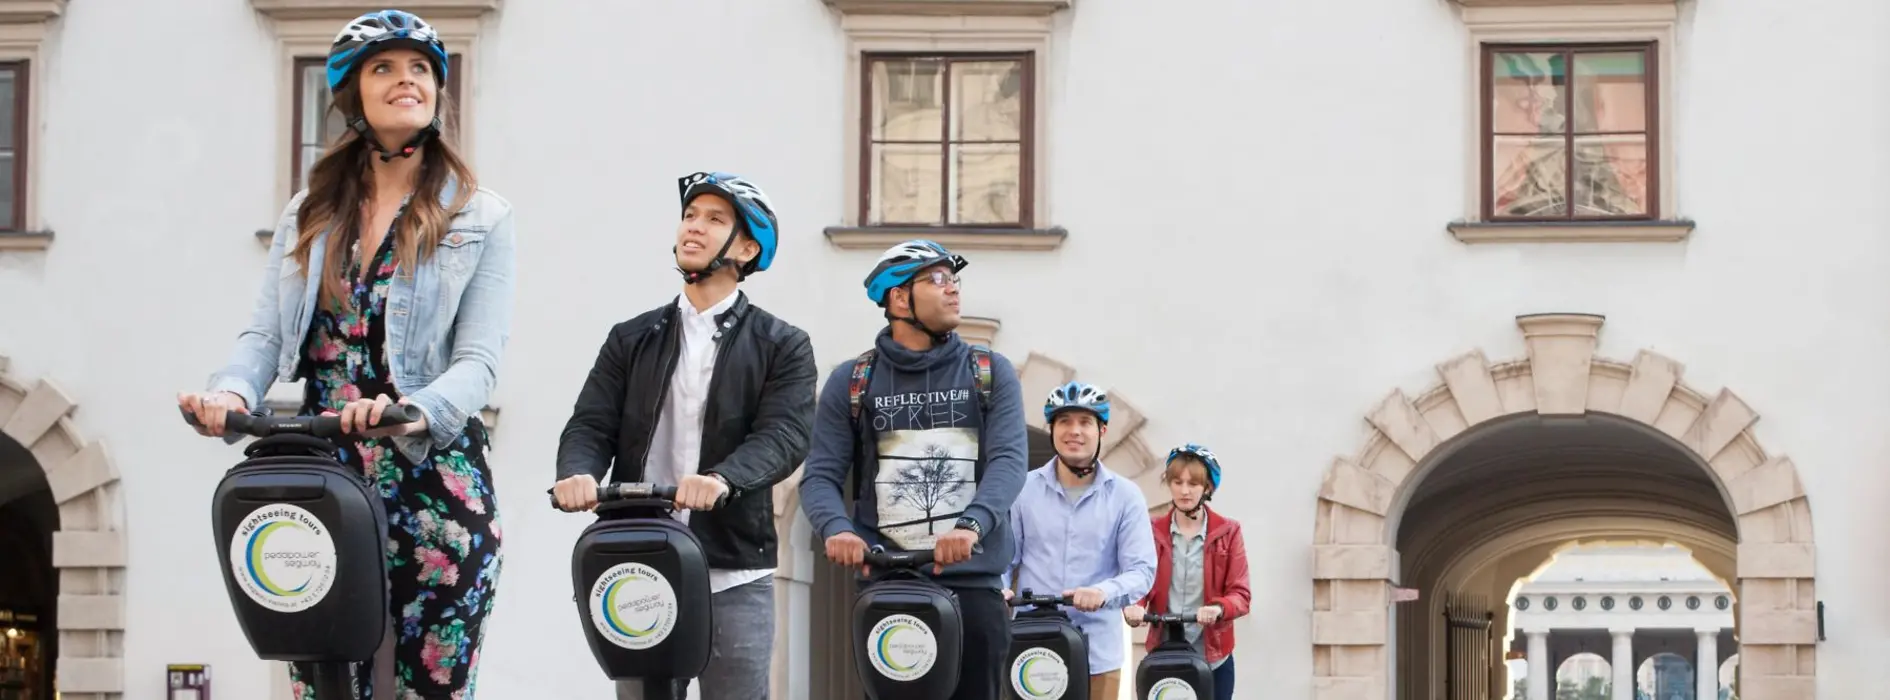 Tour group out and about in Vienna on Segways 